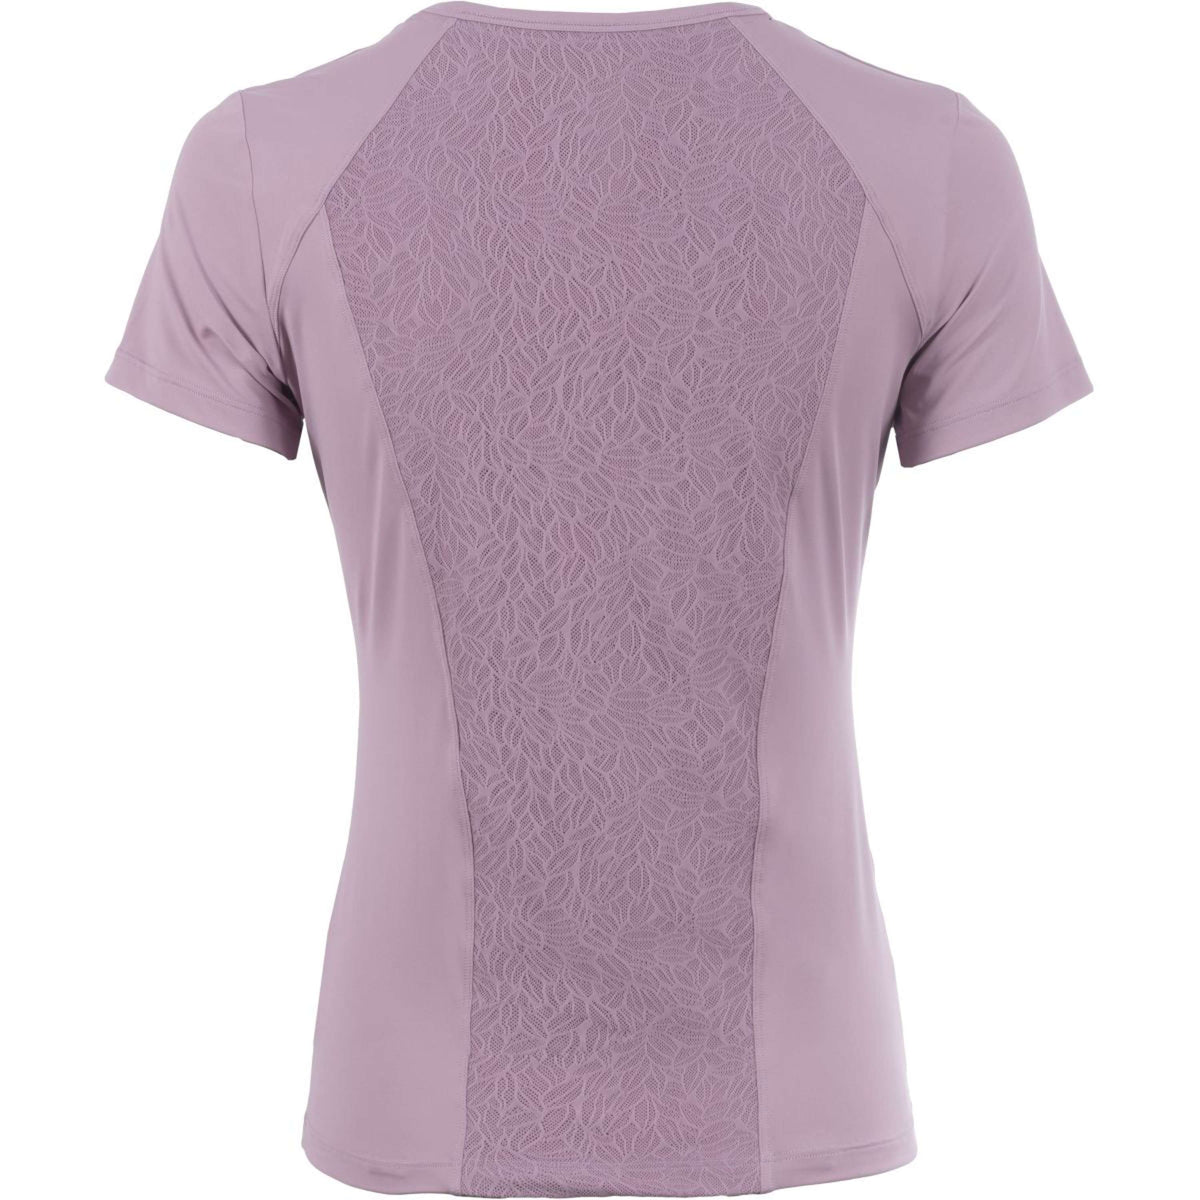 Cavallo Shirt Caval Lace Dusty Rose